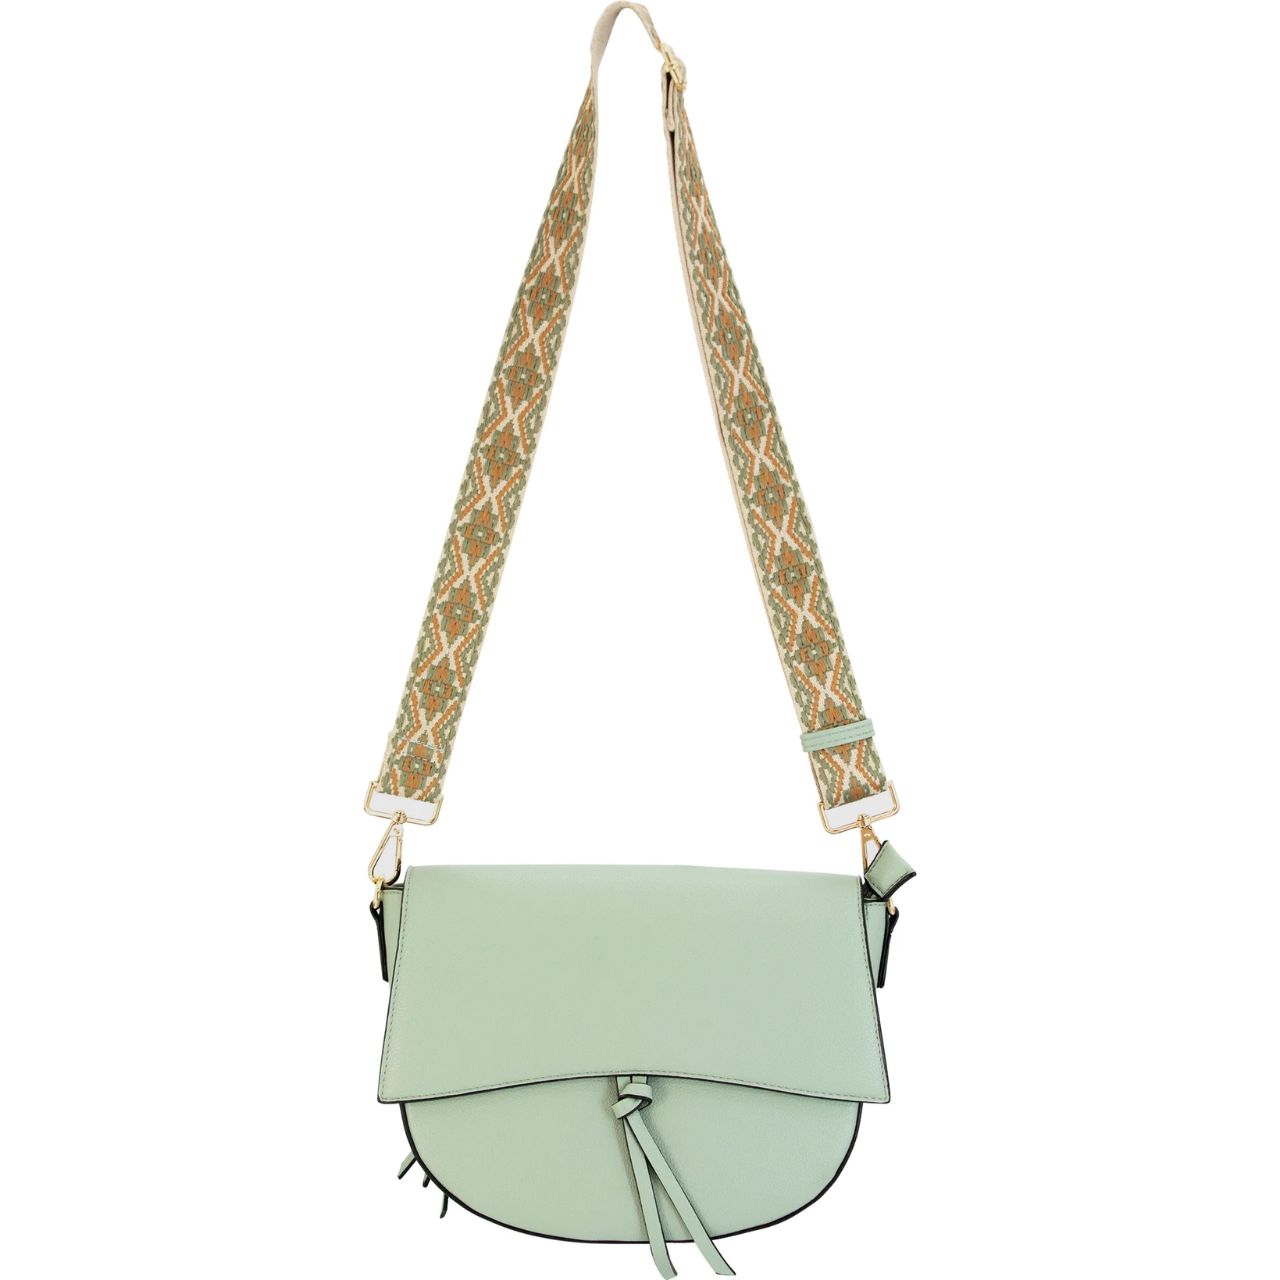 Cameleon "Zoey" Concealed Carry Purse with Embroidered Shoulder Strap